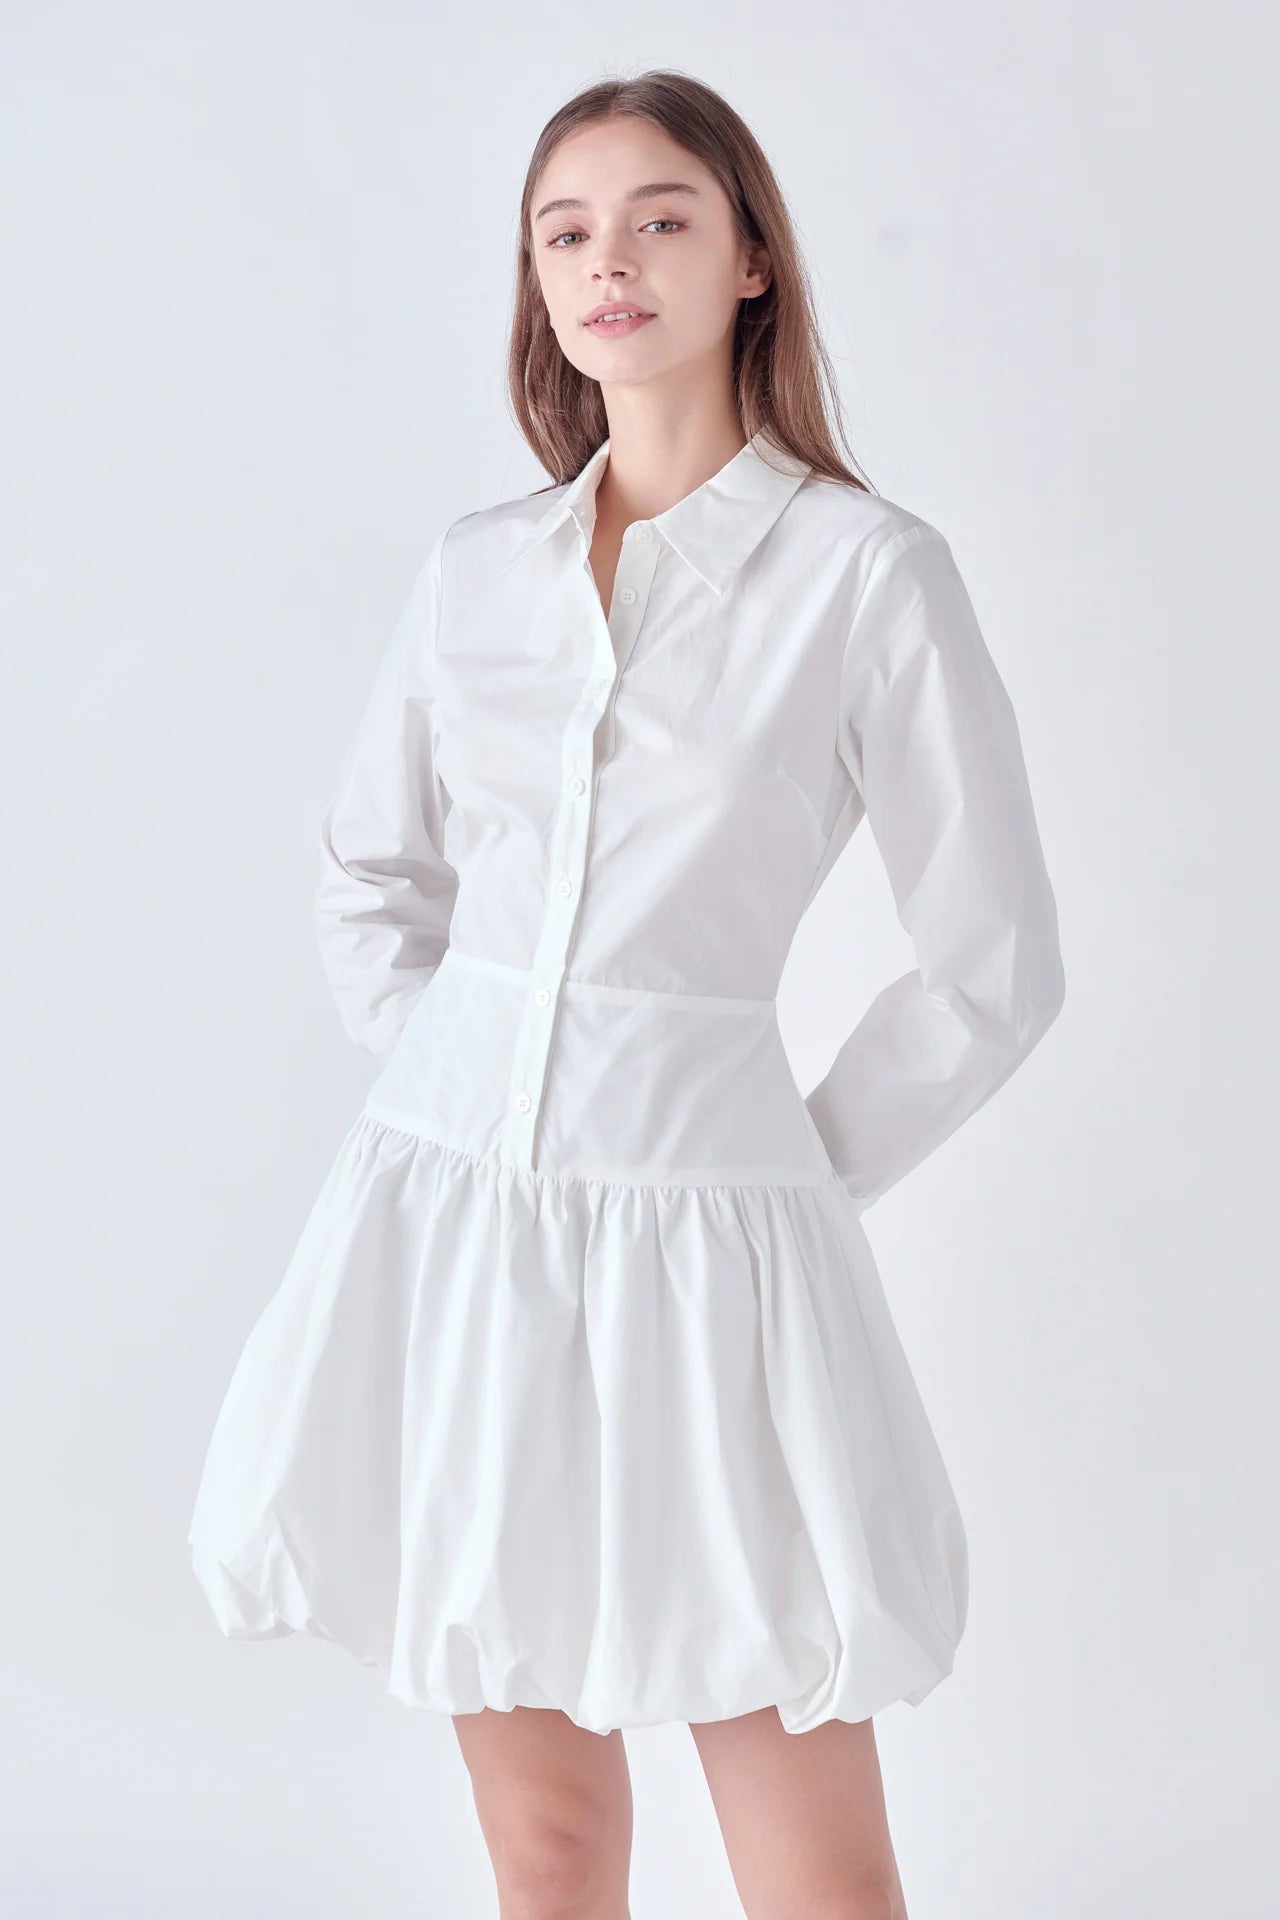 Photo of model wearing Poppy Poplin Button Up Dress in White With bubble skirt, button detailing, and collar available at UniKoncept in Waterloo front view